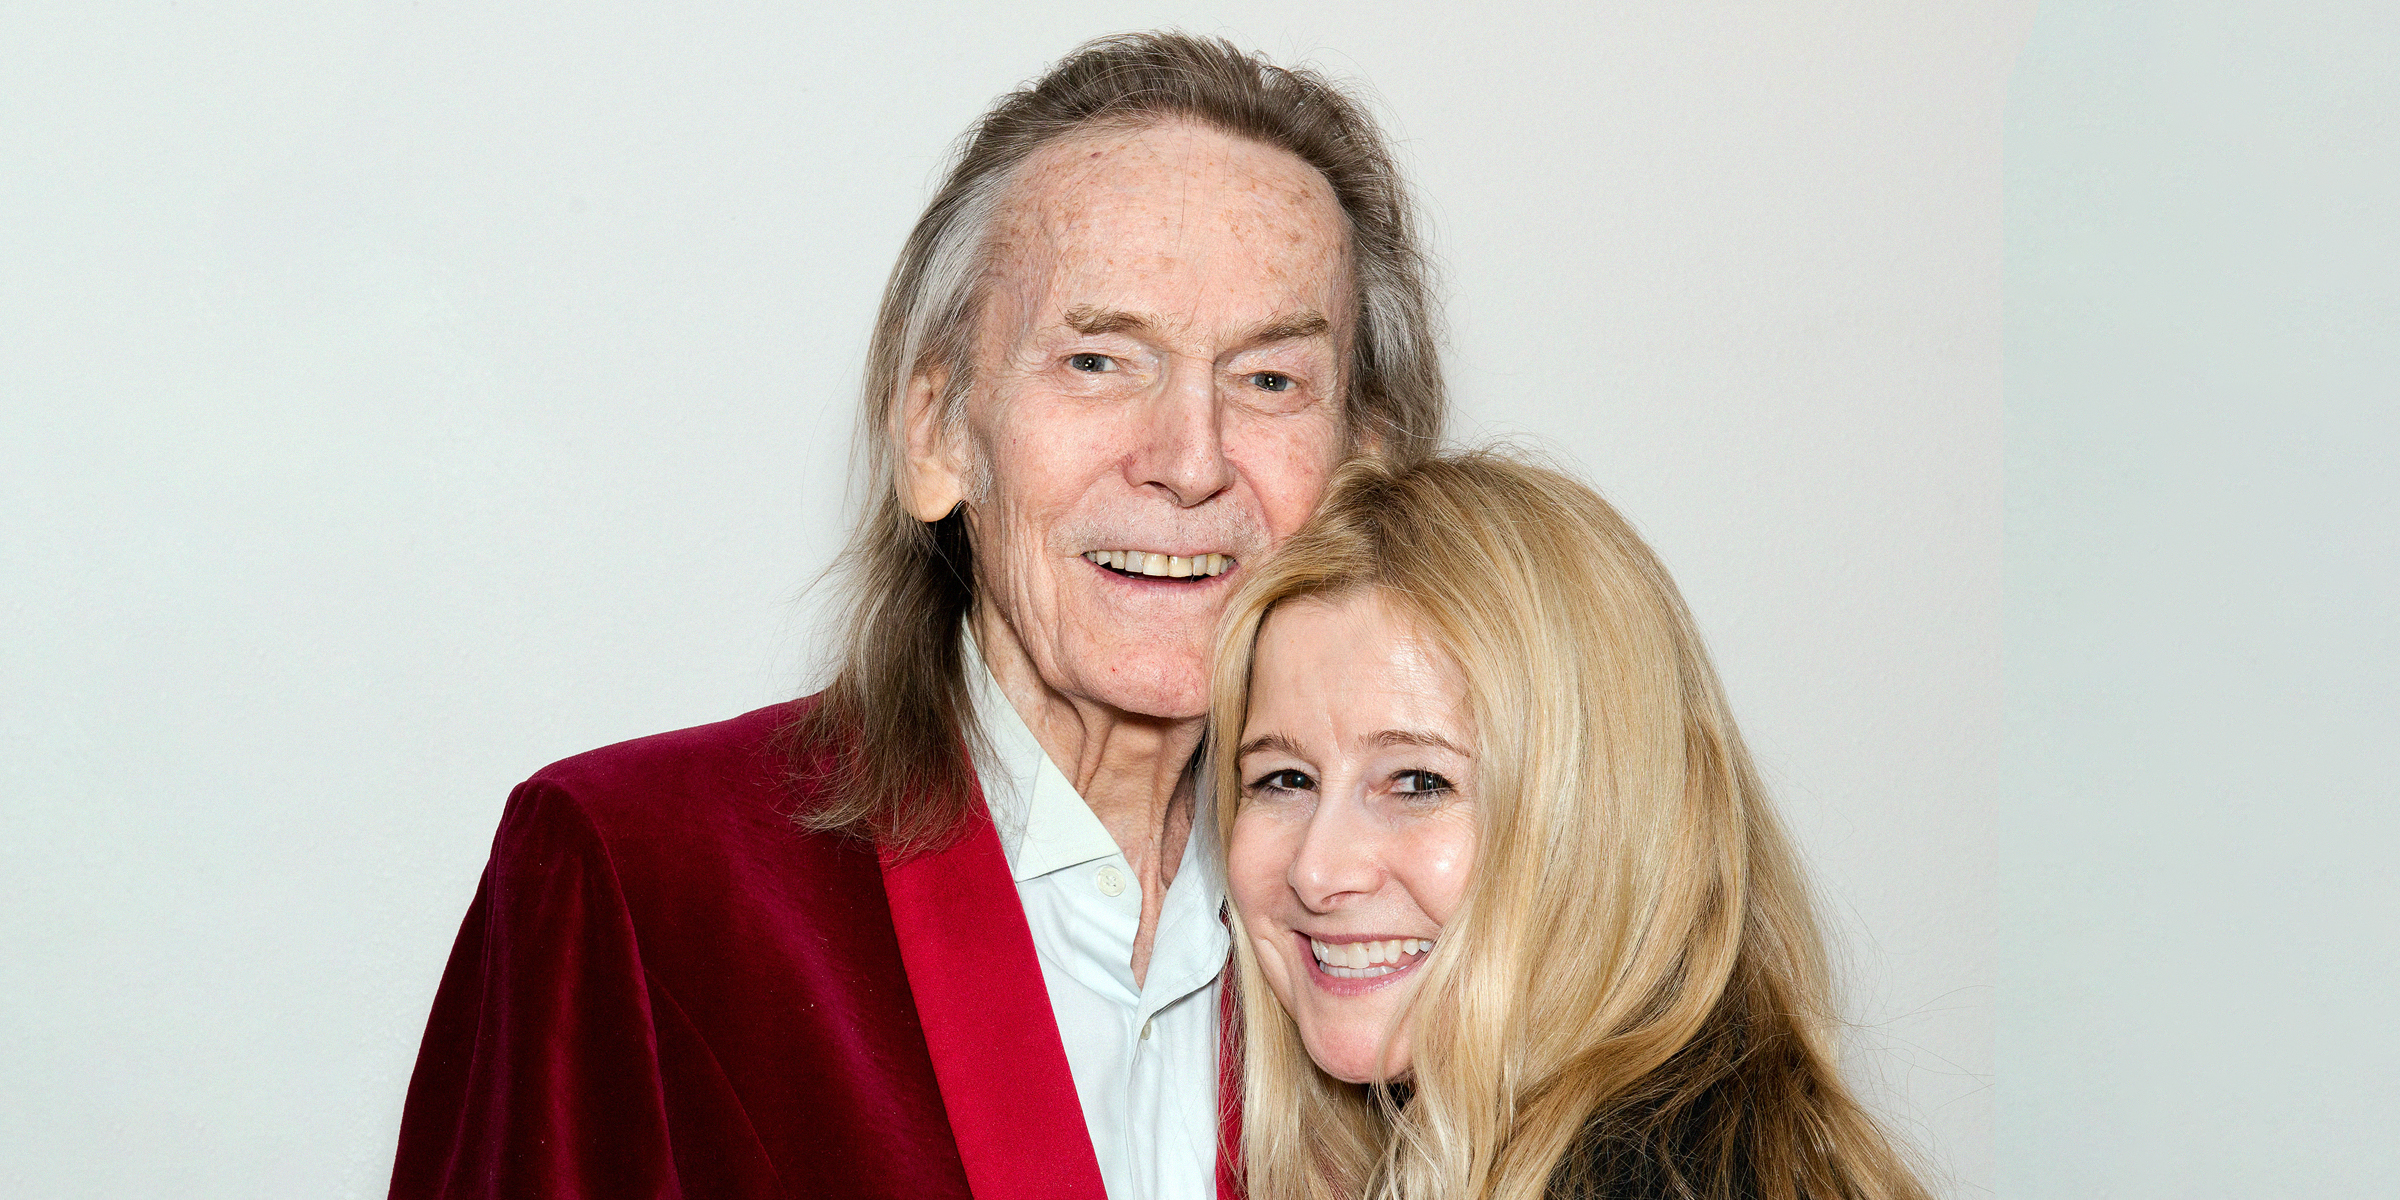 Gordon Lightfoot and Kim Hasse | Source: Getty Images